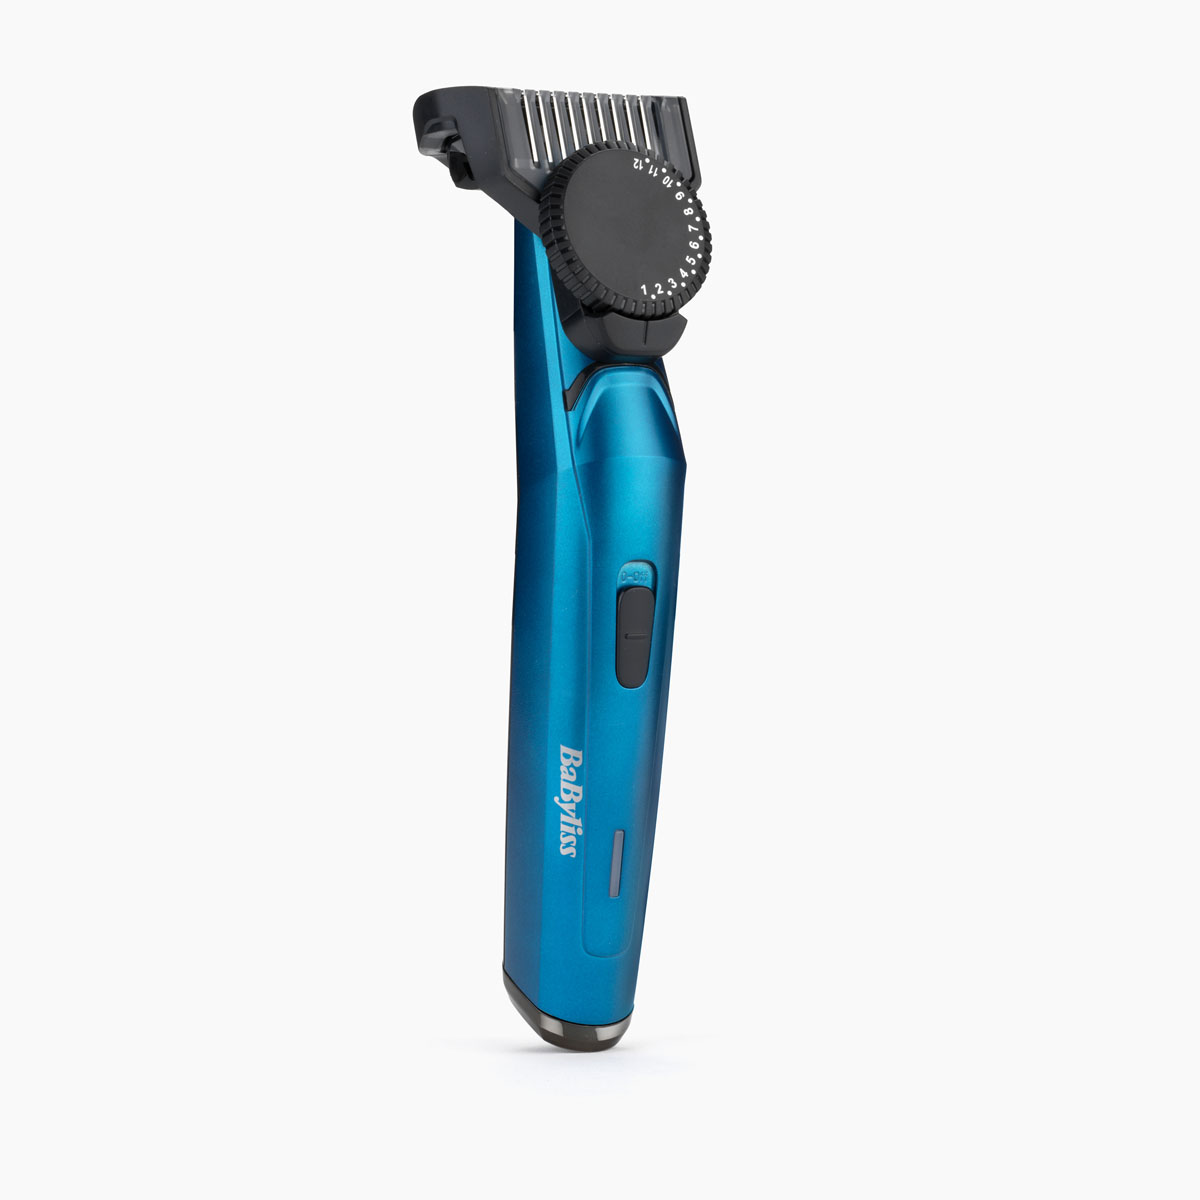 Tondeuse barbe Japanese Steel - BaByliss